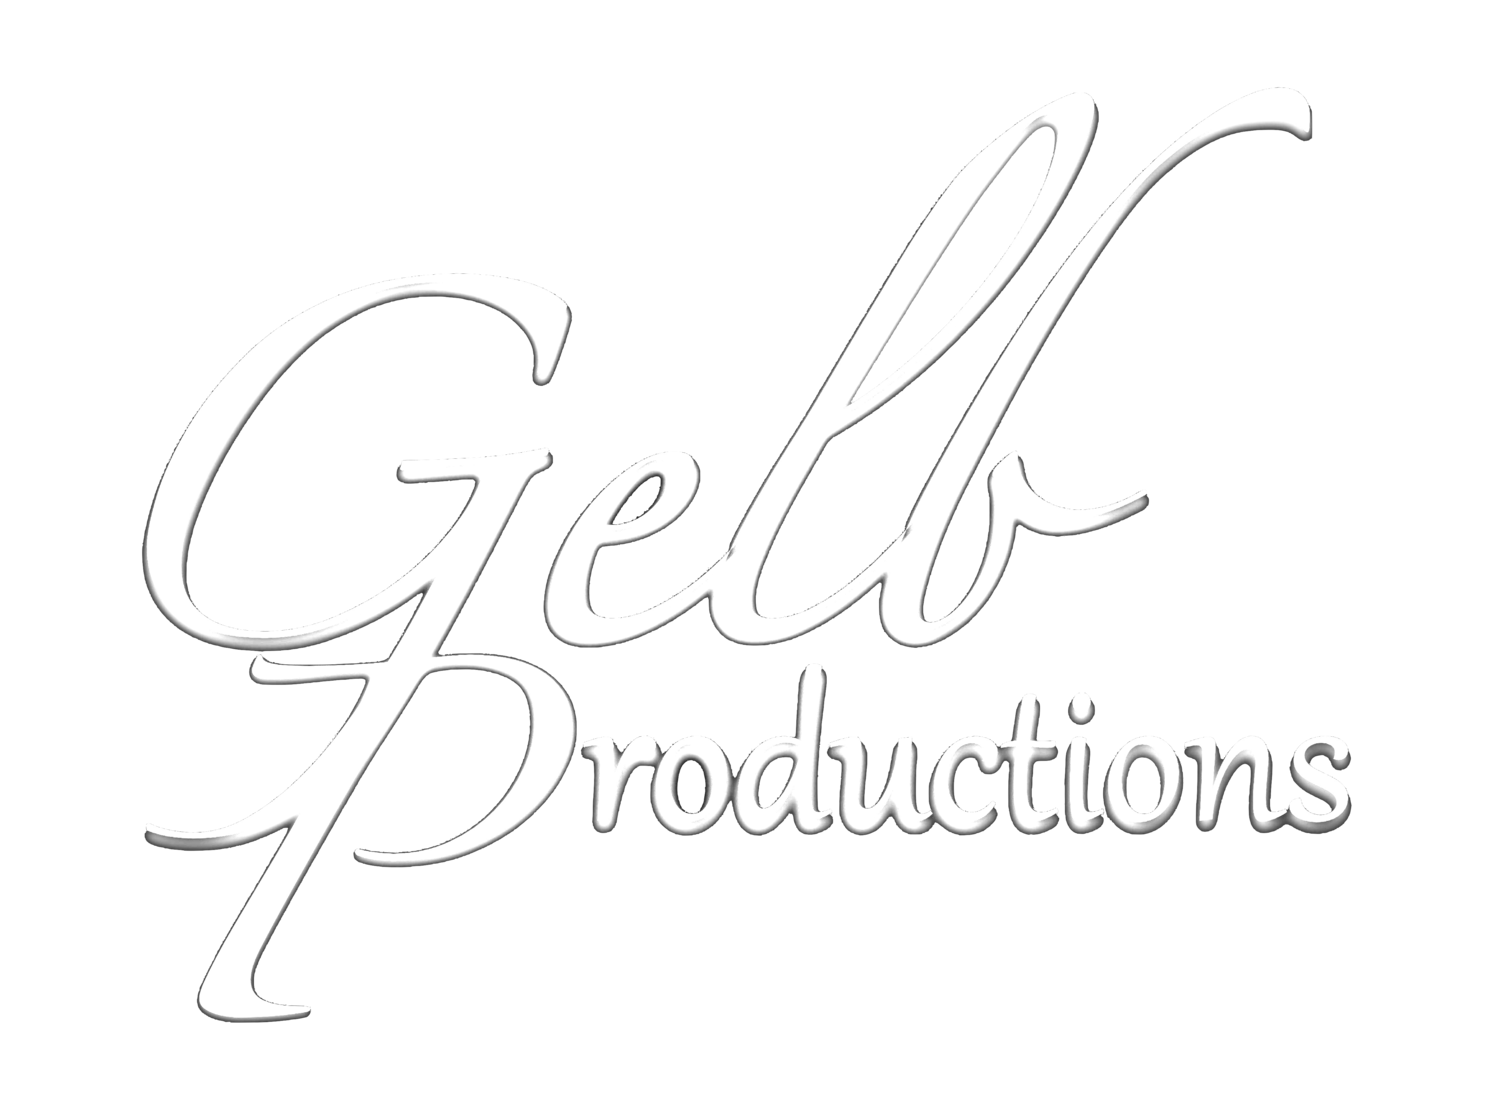 GELB PRODUCTION 